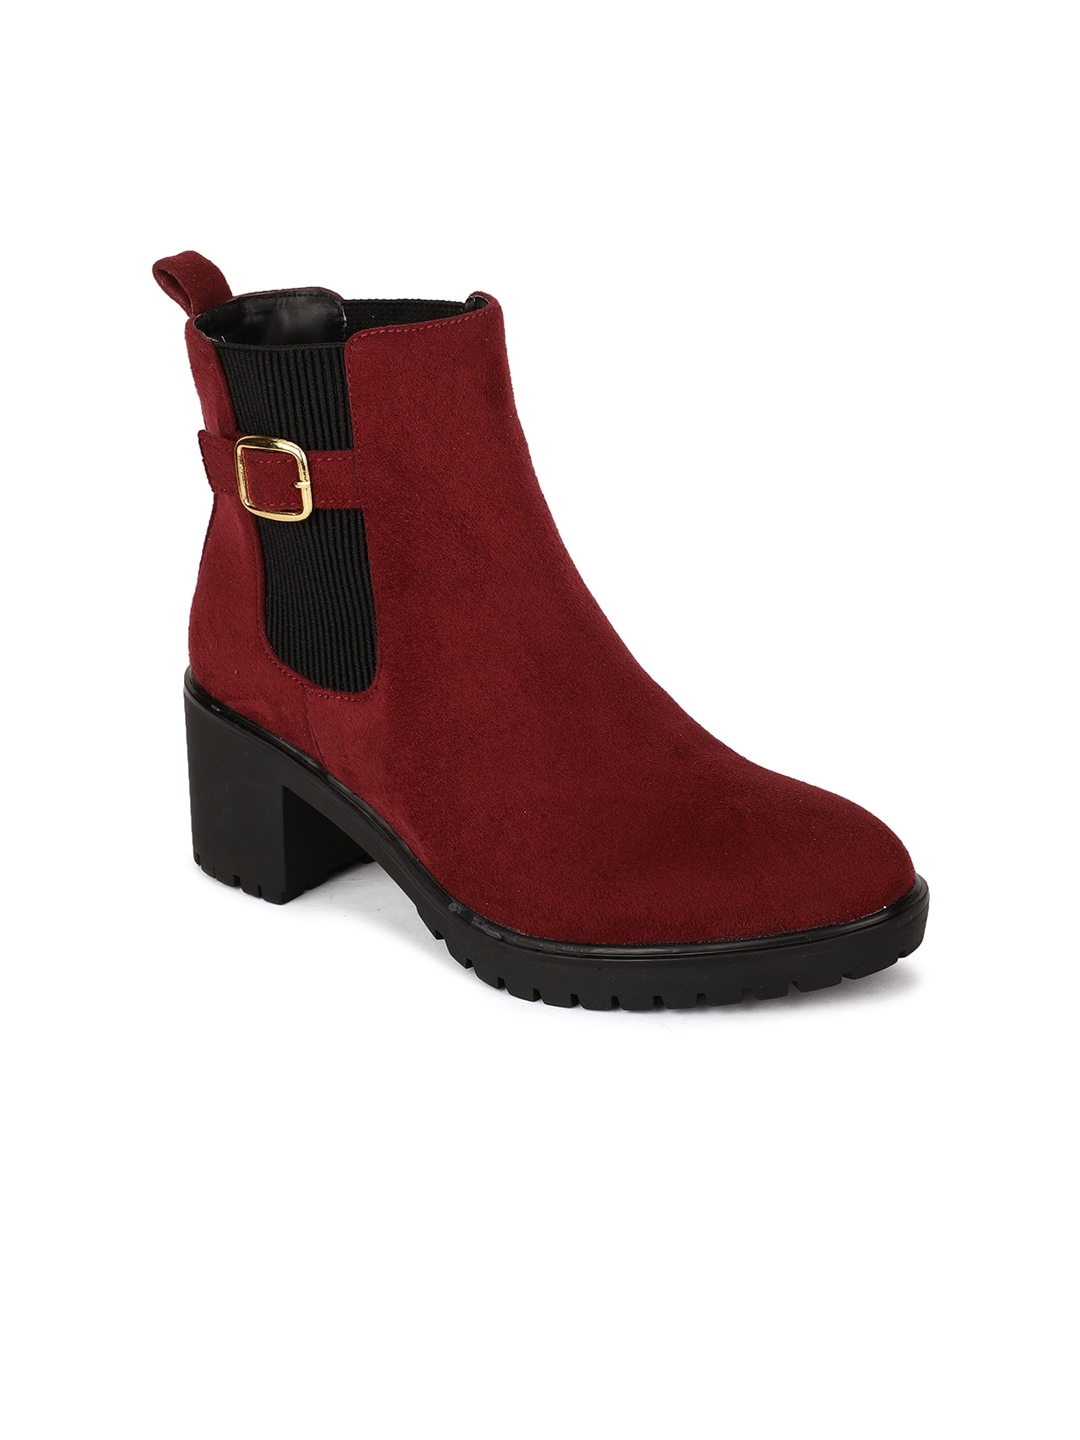 Bruno Manetti Maroon Suede Block Heeled Boots with Buckles Price in India